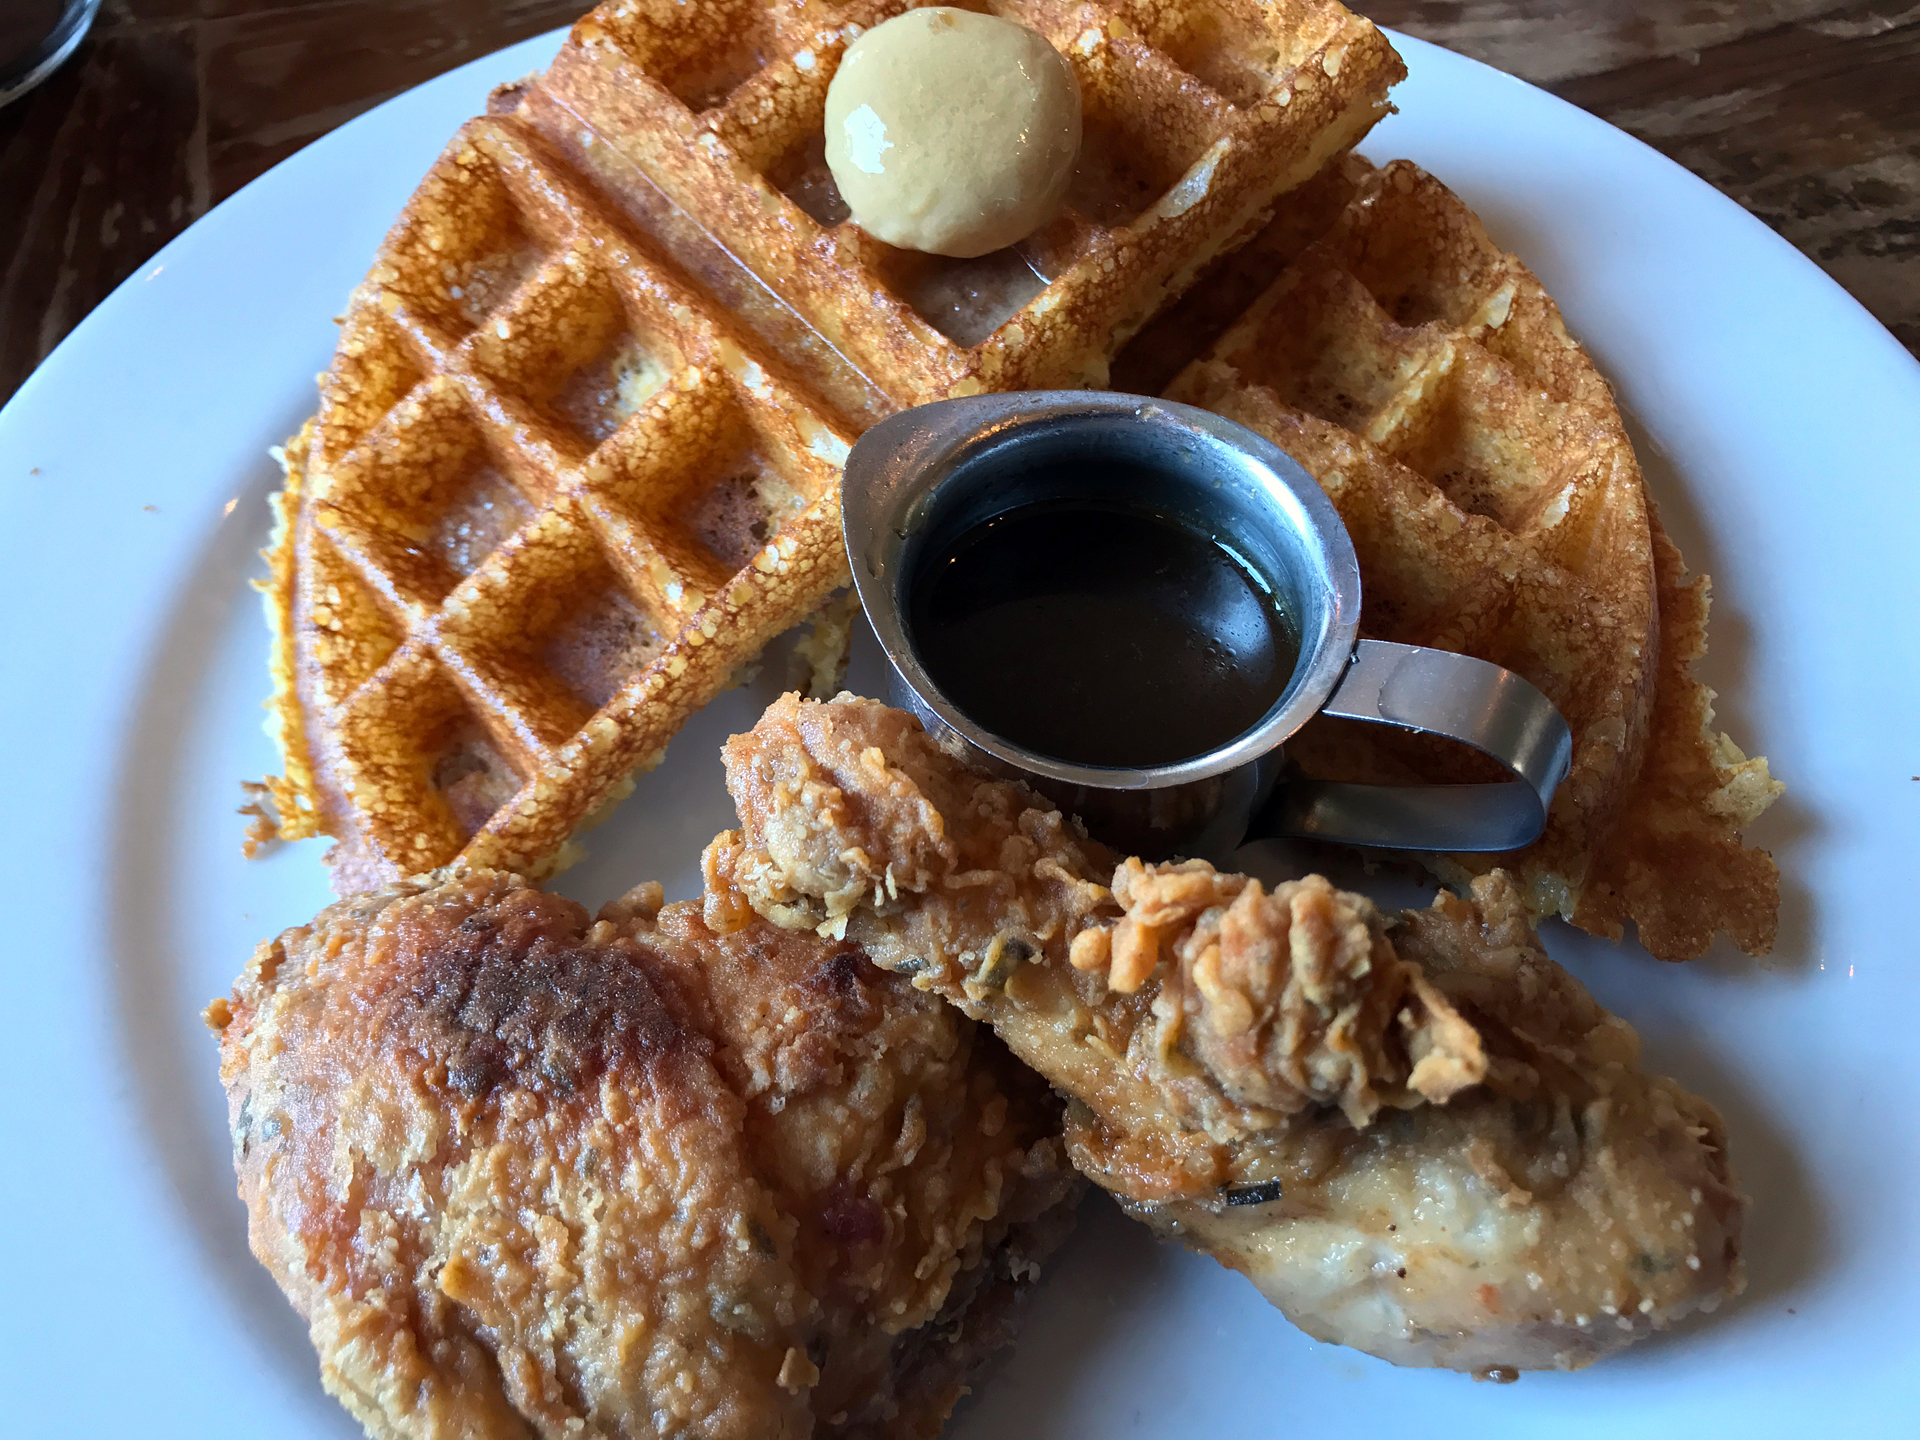 Tanya Holland's deservedly famous chicken and waffles at Brown Sugar Kitchen.